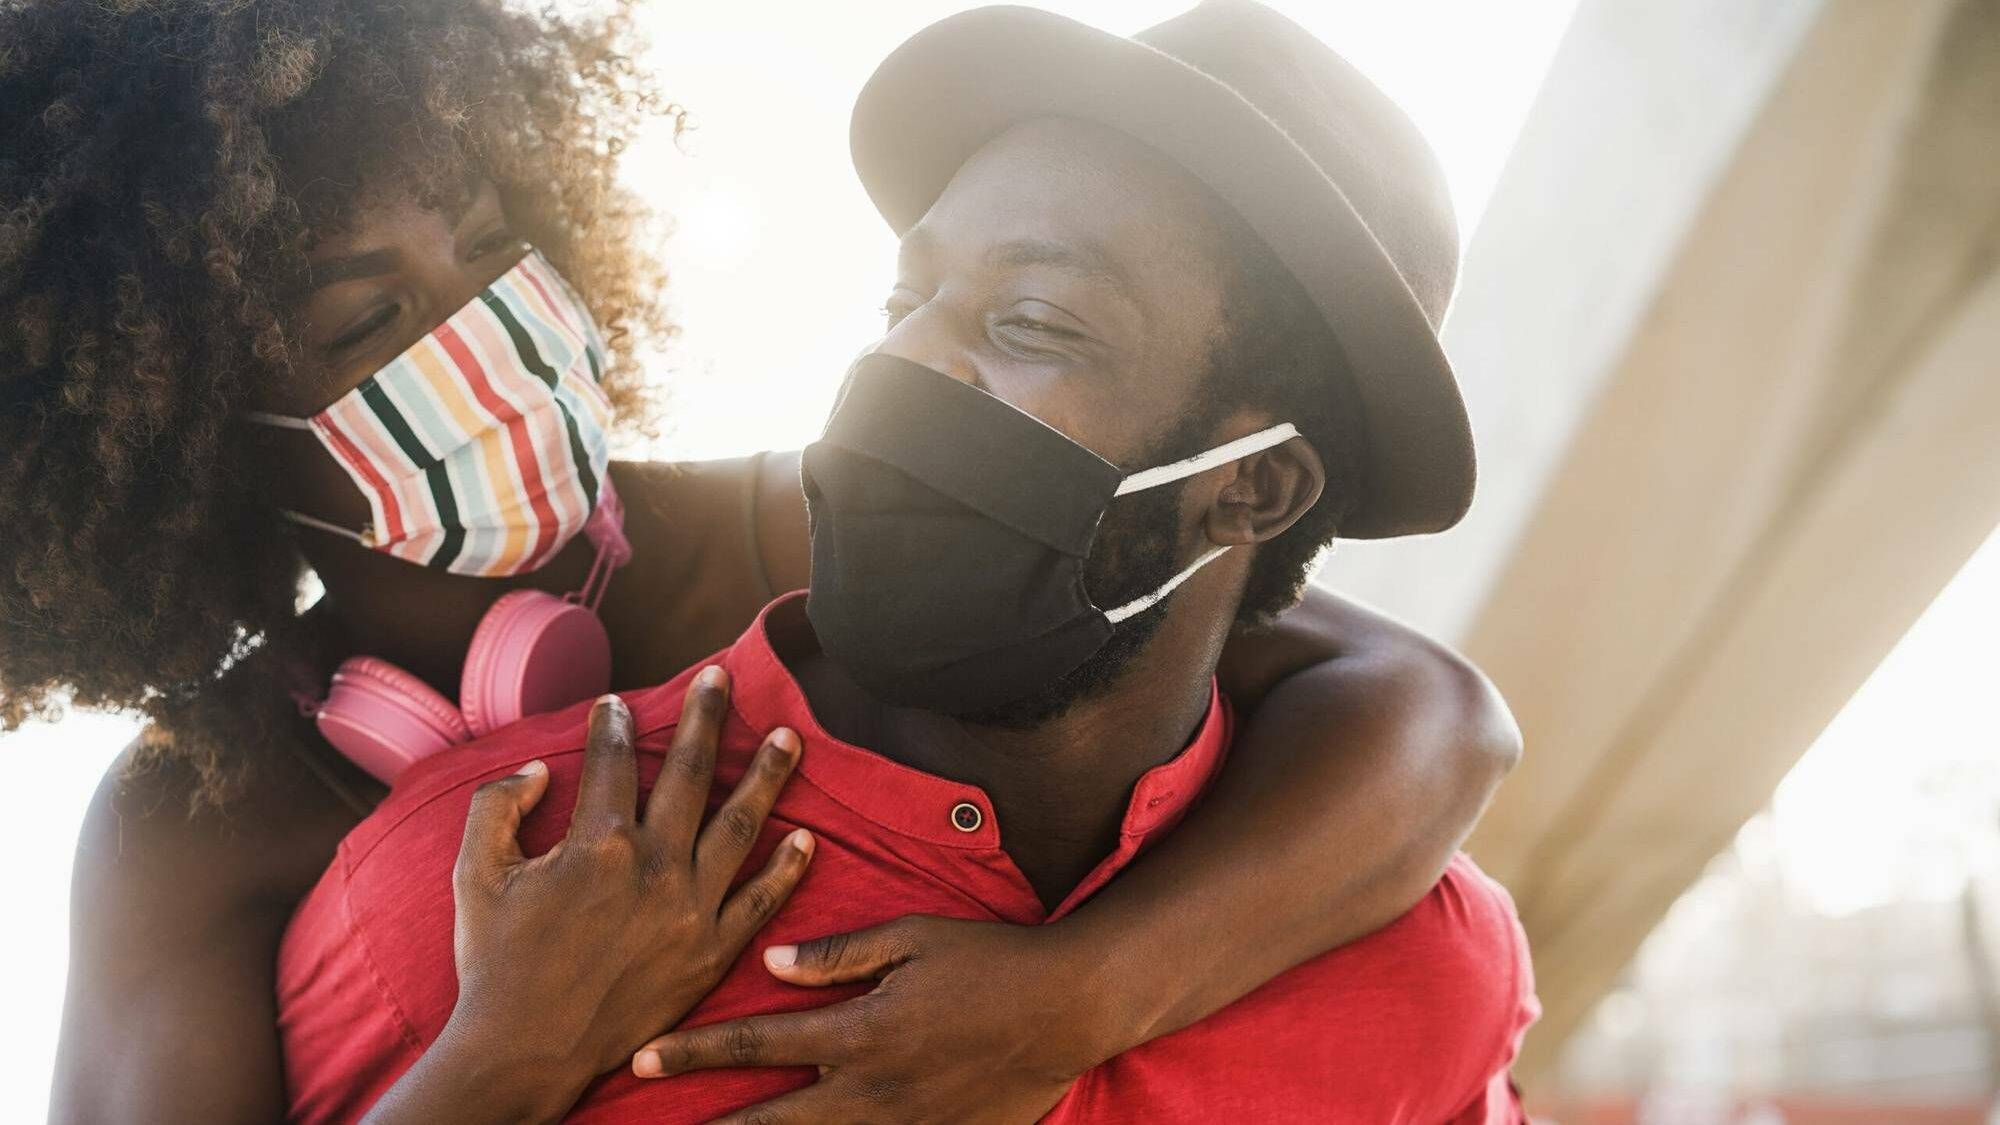 Photograph of a couple wearing masks and embracing and looking into each others eyes